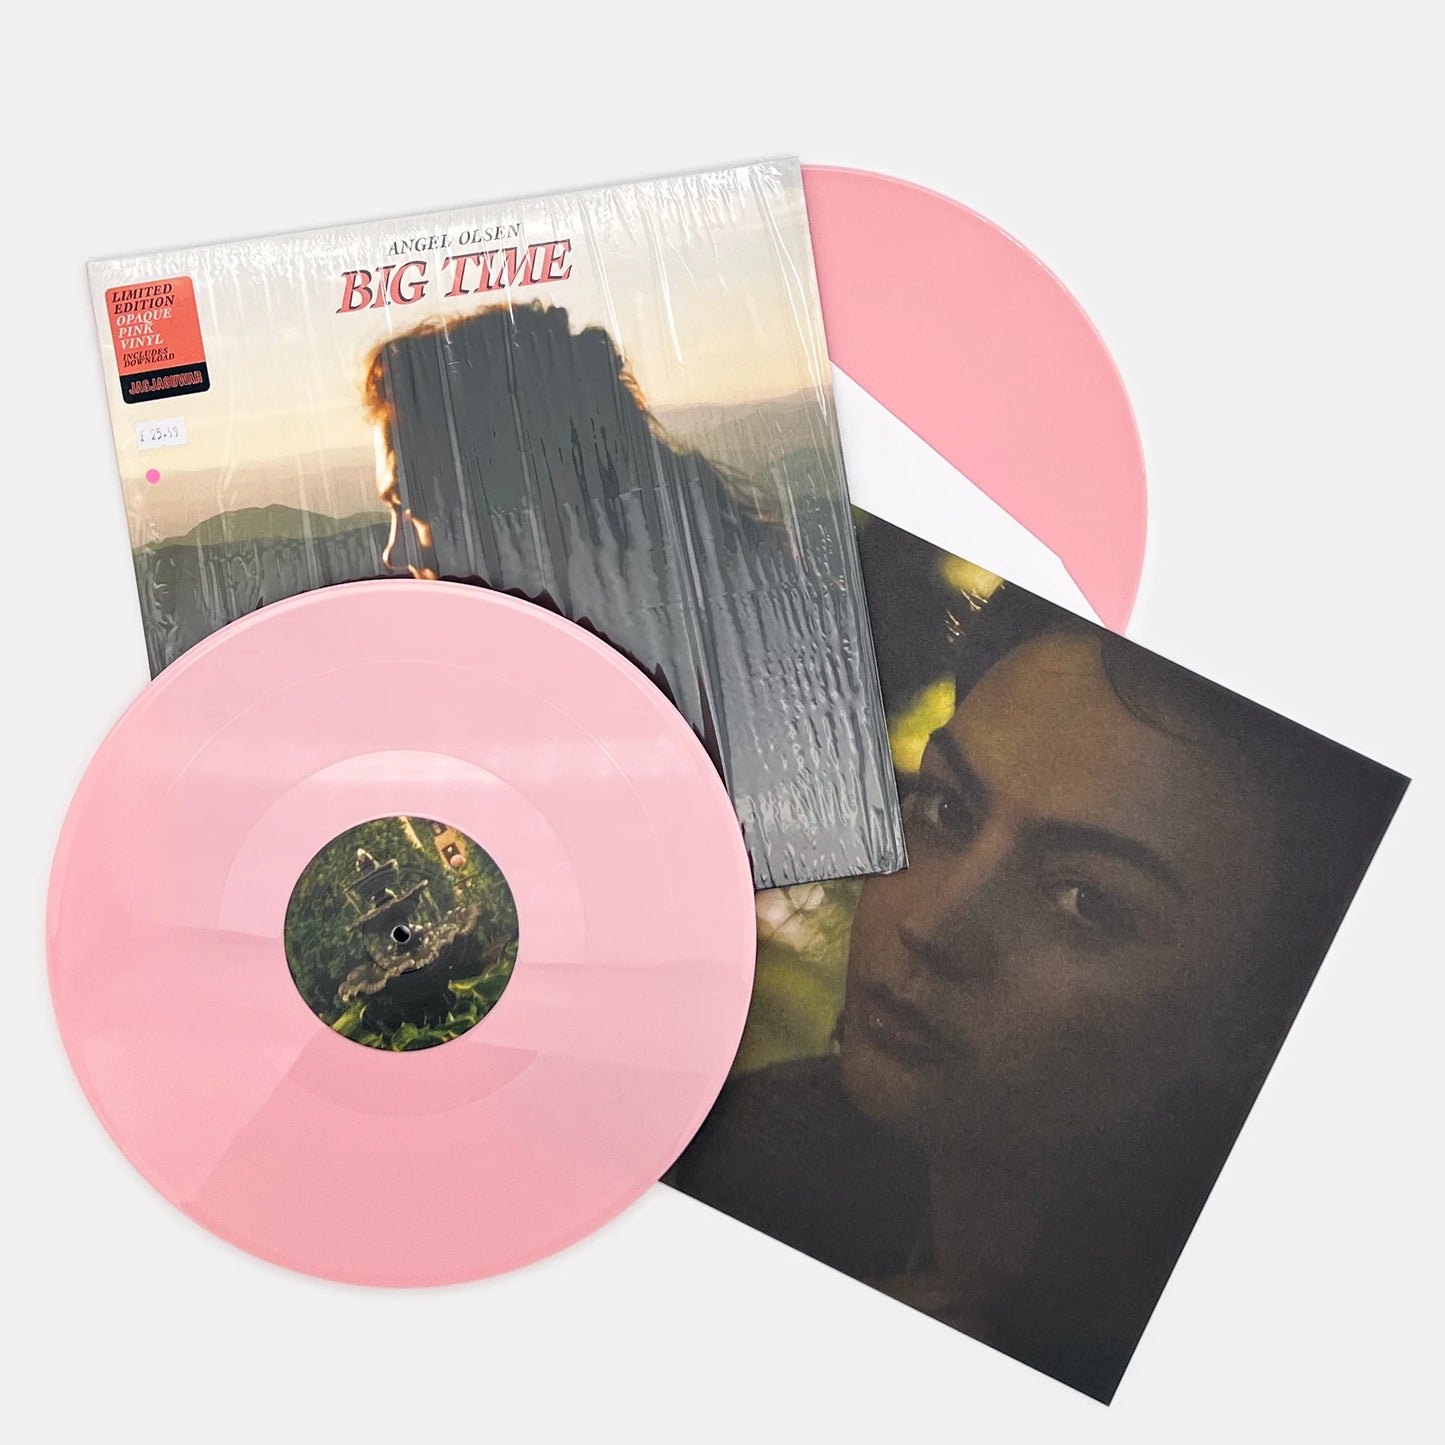 Angel Olsen - Big Time (Limited Edition on Opaque Pink Vinyl)